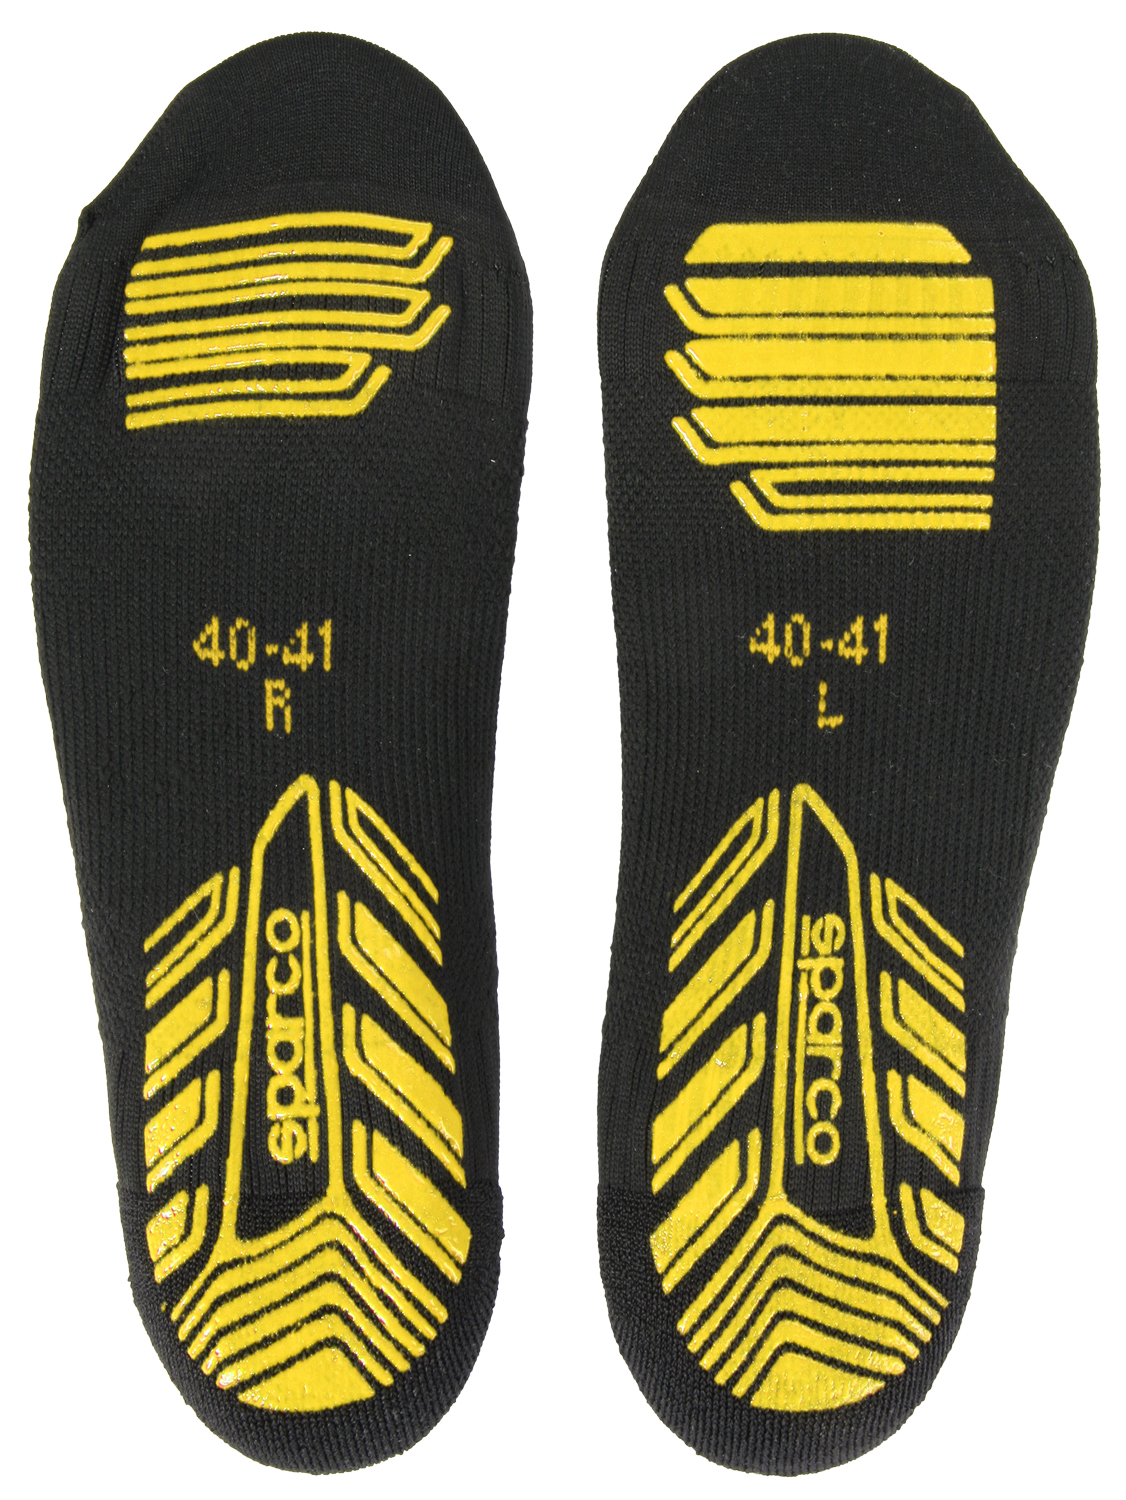 CHAUSSETTES HYPERSPEED SPARCO